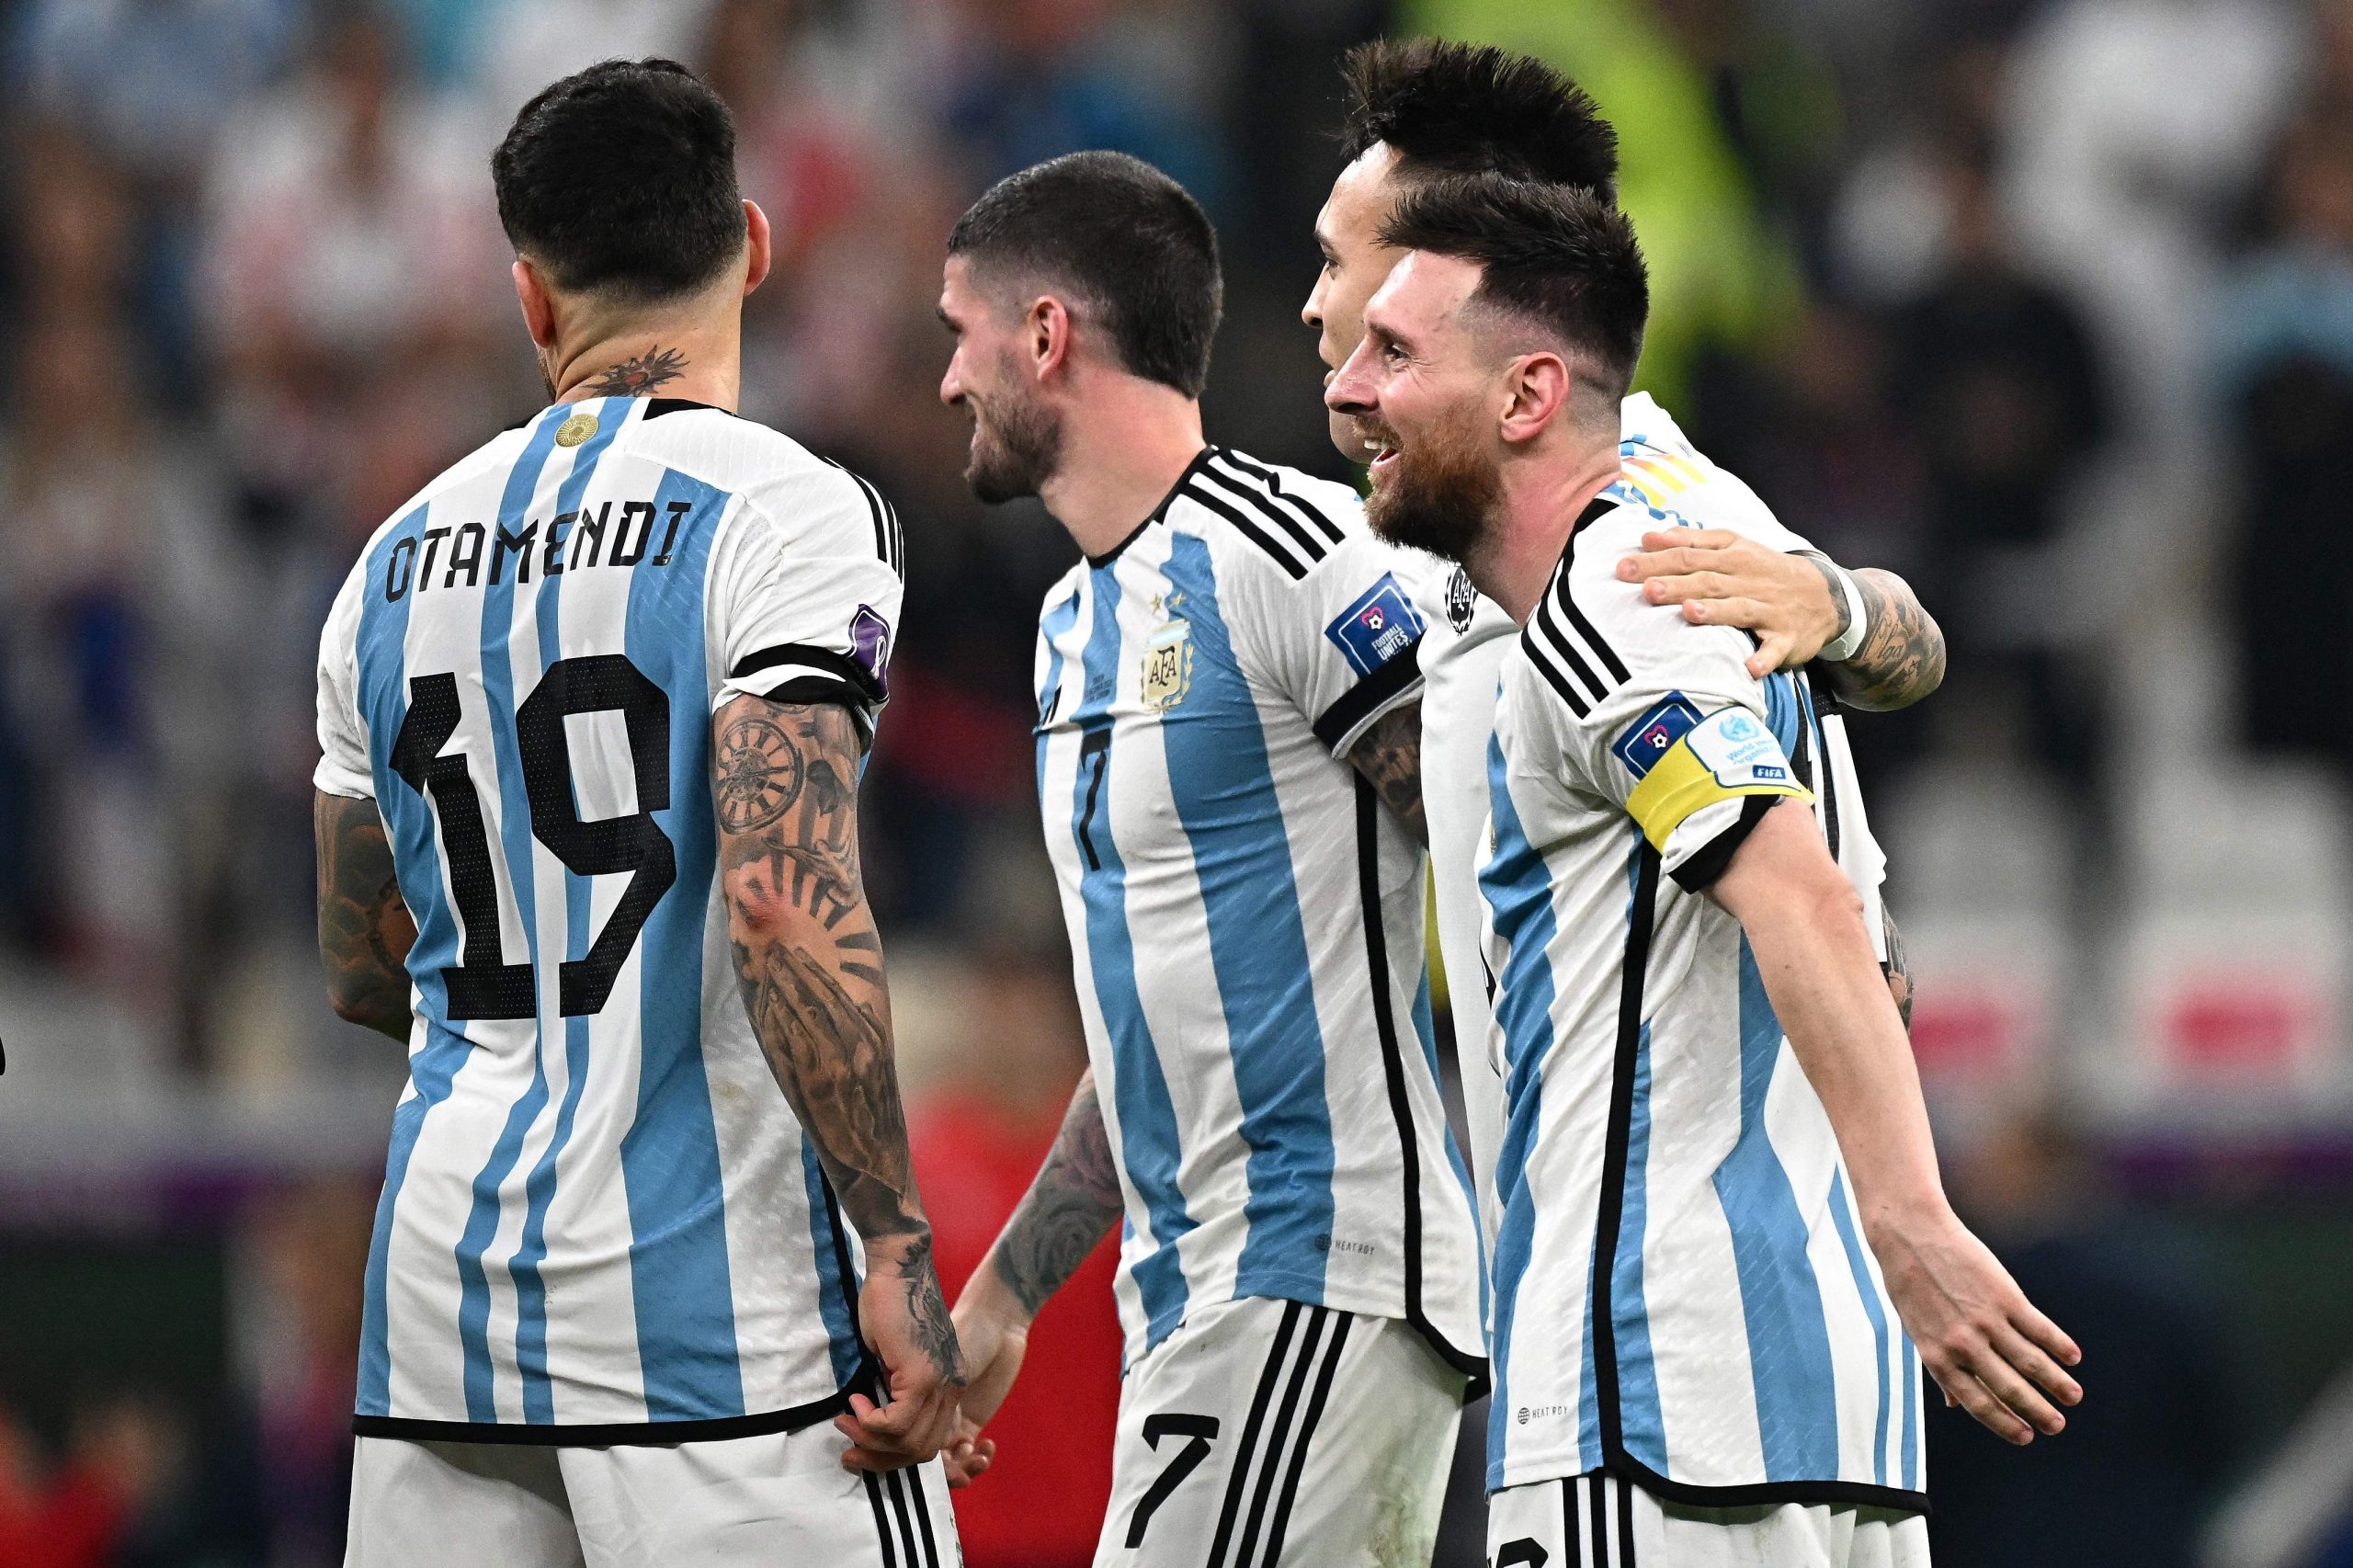 Heavyweight World Cup Final between Argentina and France to Win Third World Cup Title